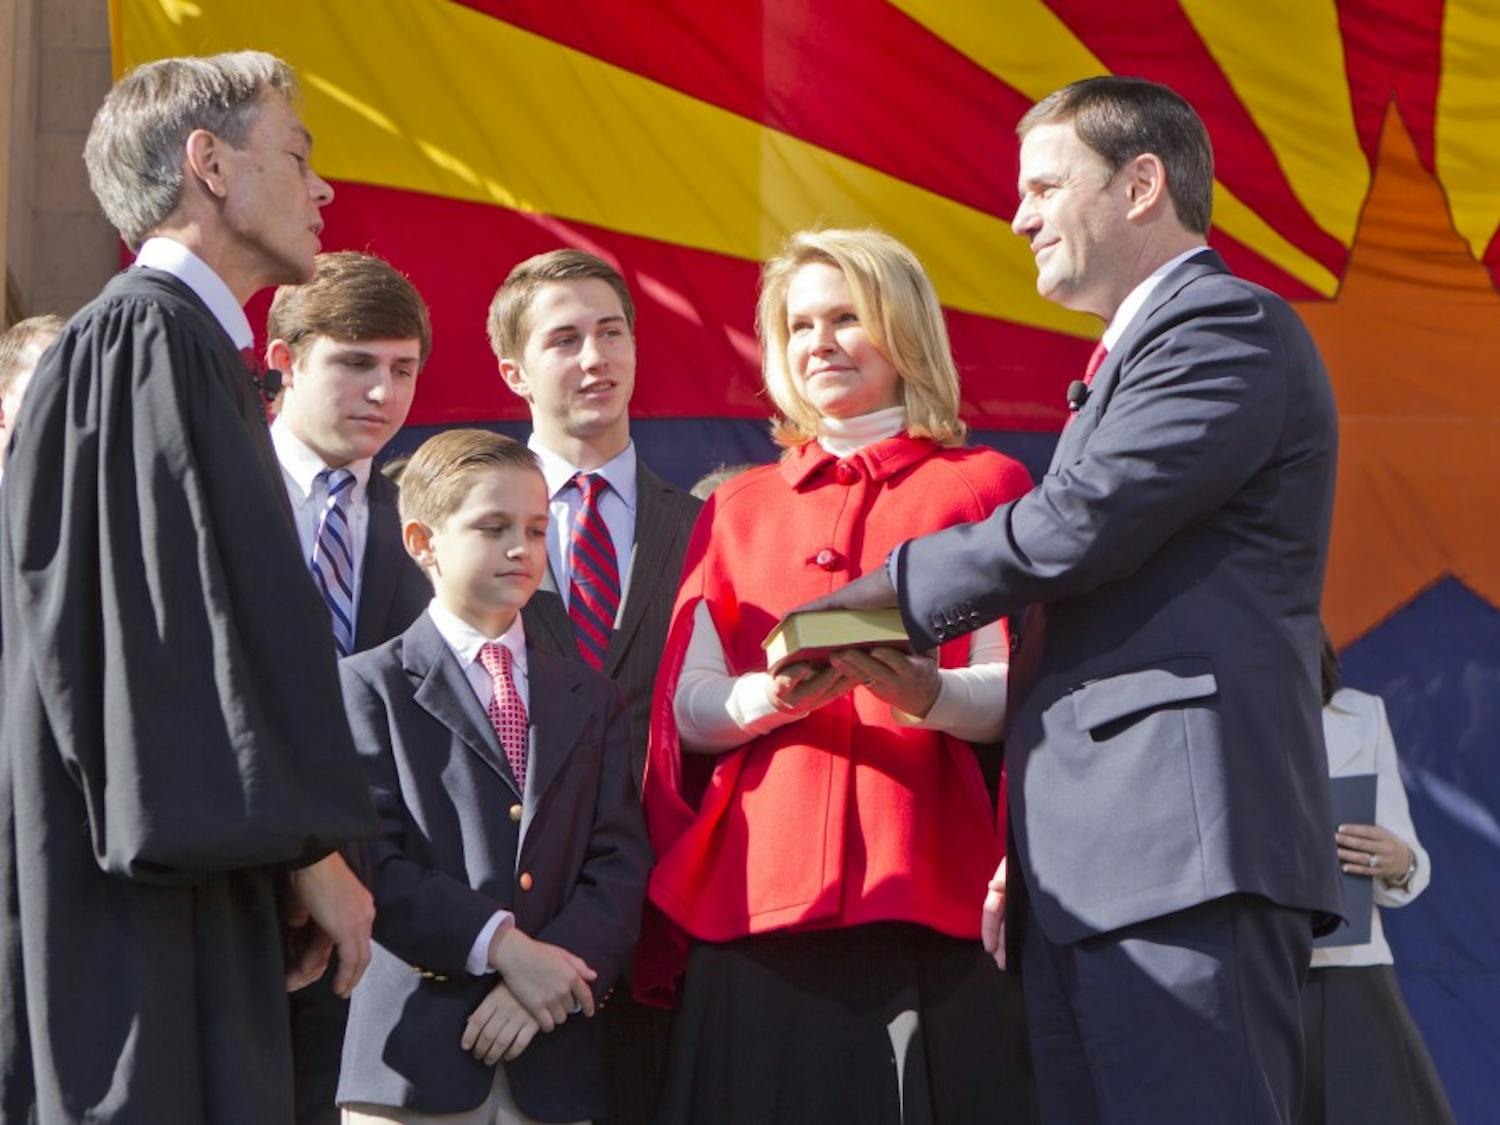 Doug Ducey taking his oath to office as Arizona's governor with his family beside him.  The inauguration took place at the State Capitol courtyard on January 5, 2015.  (Photo by Emily Johnson)